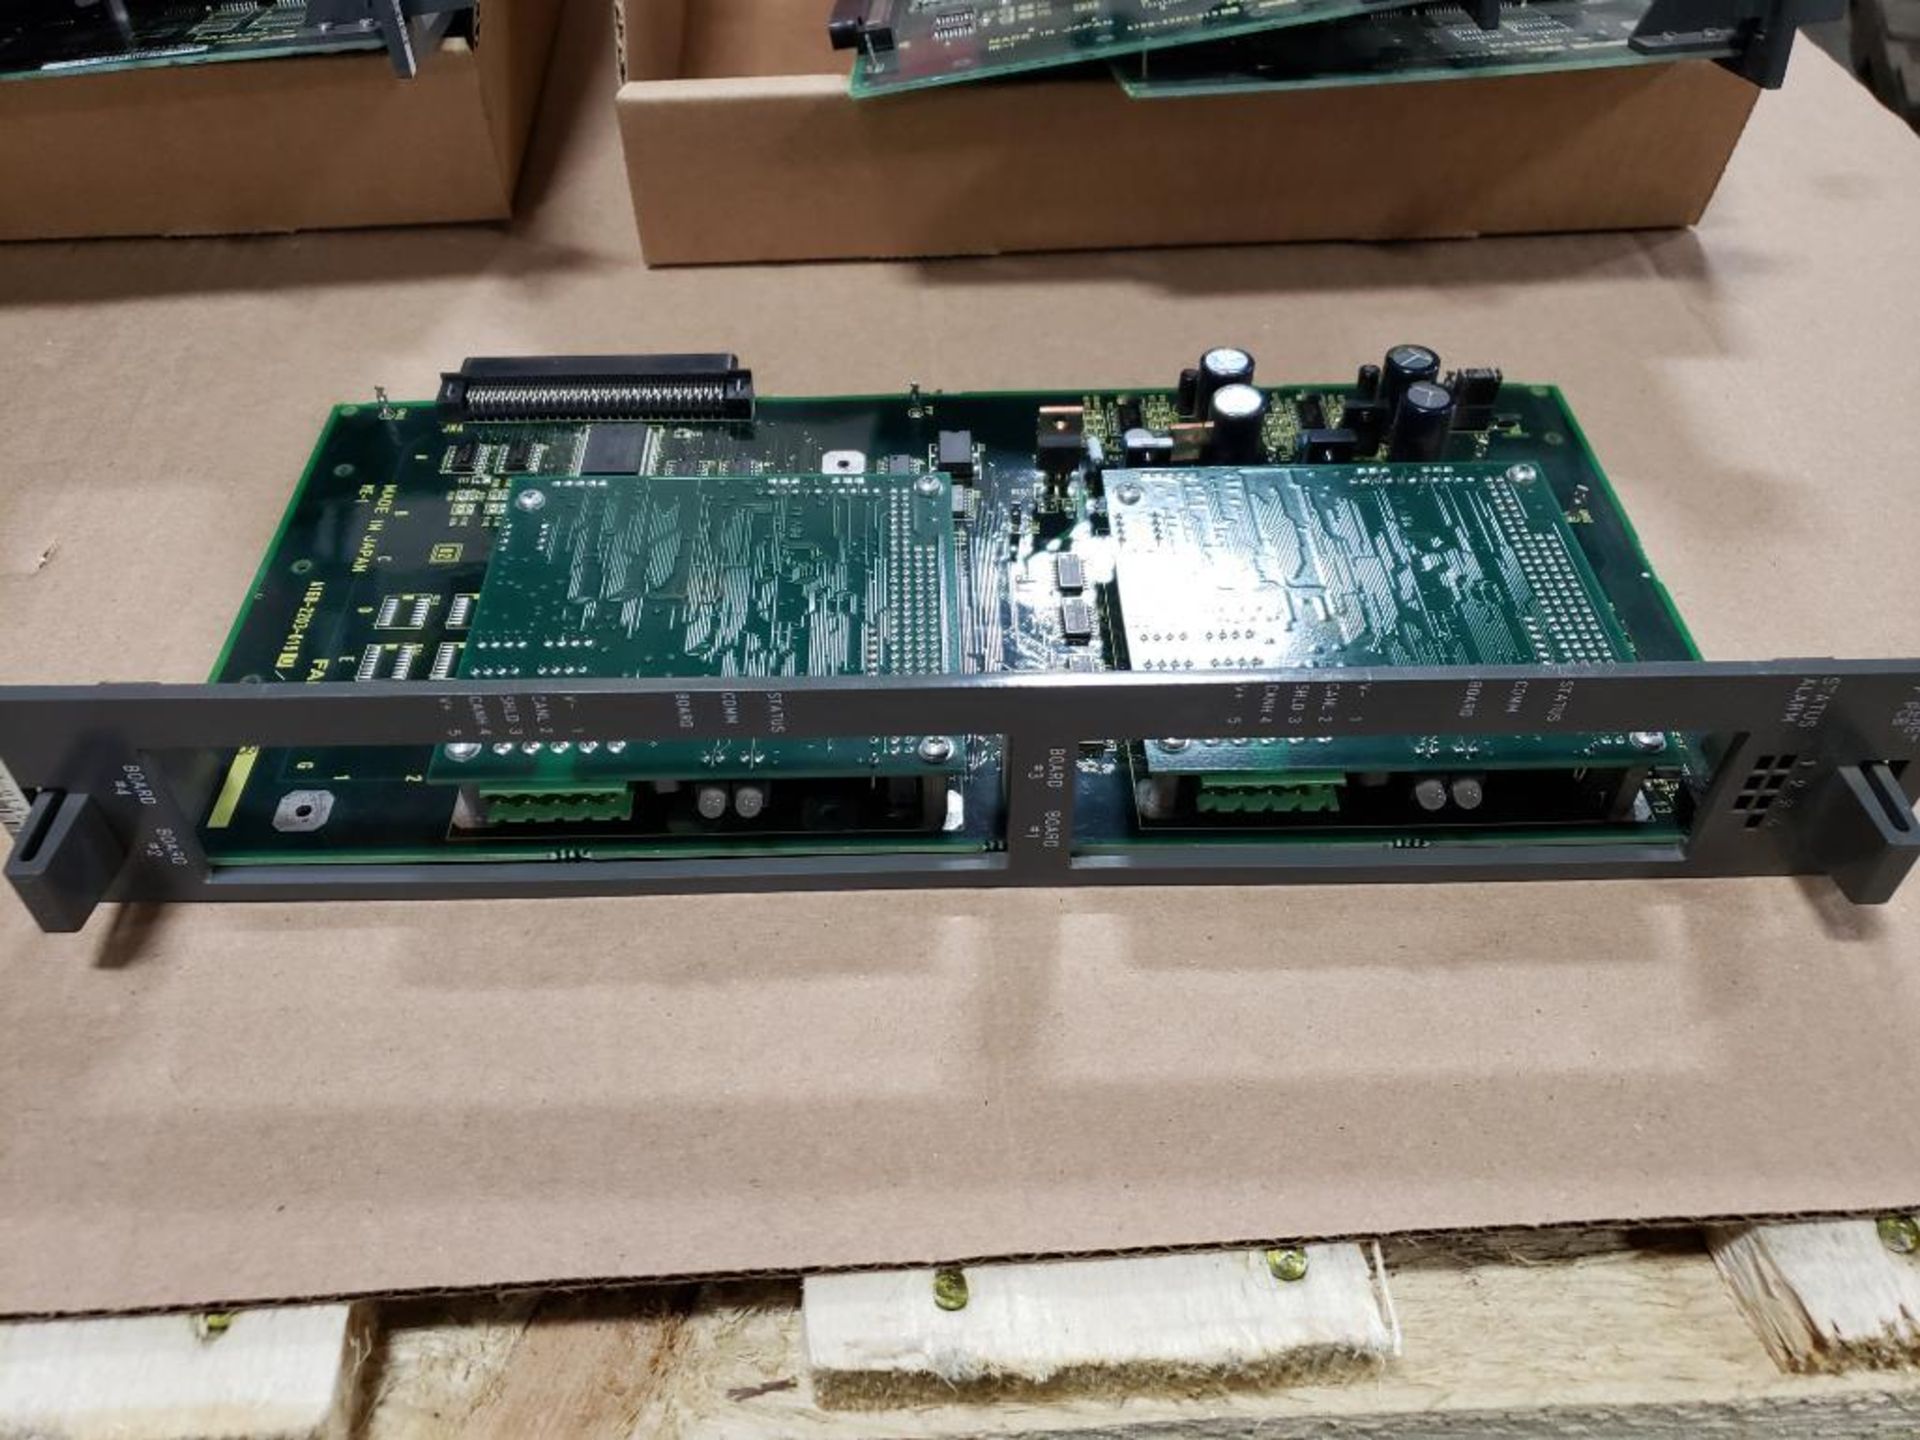 Qty 3 - Fanuc control board. Part number A16B-2203-0190/03A. - Image 2 of 6